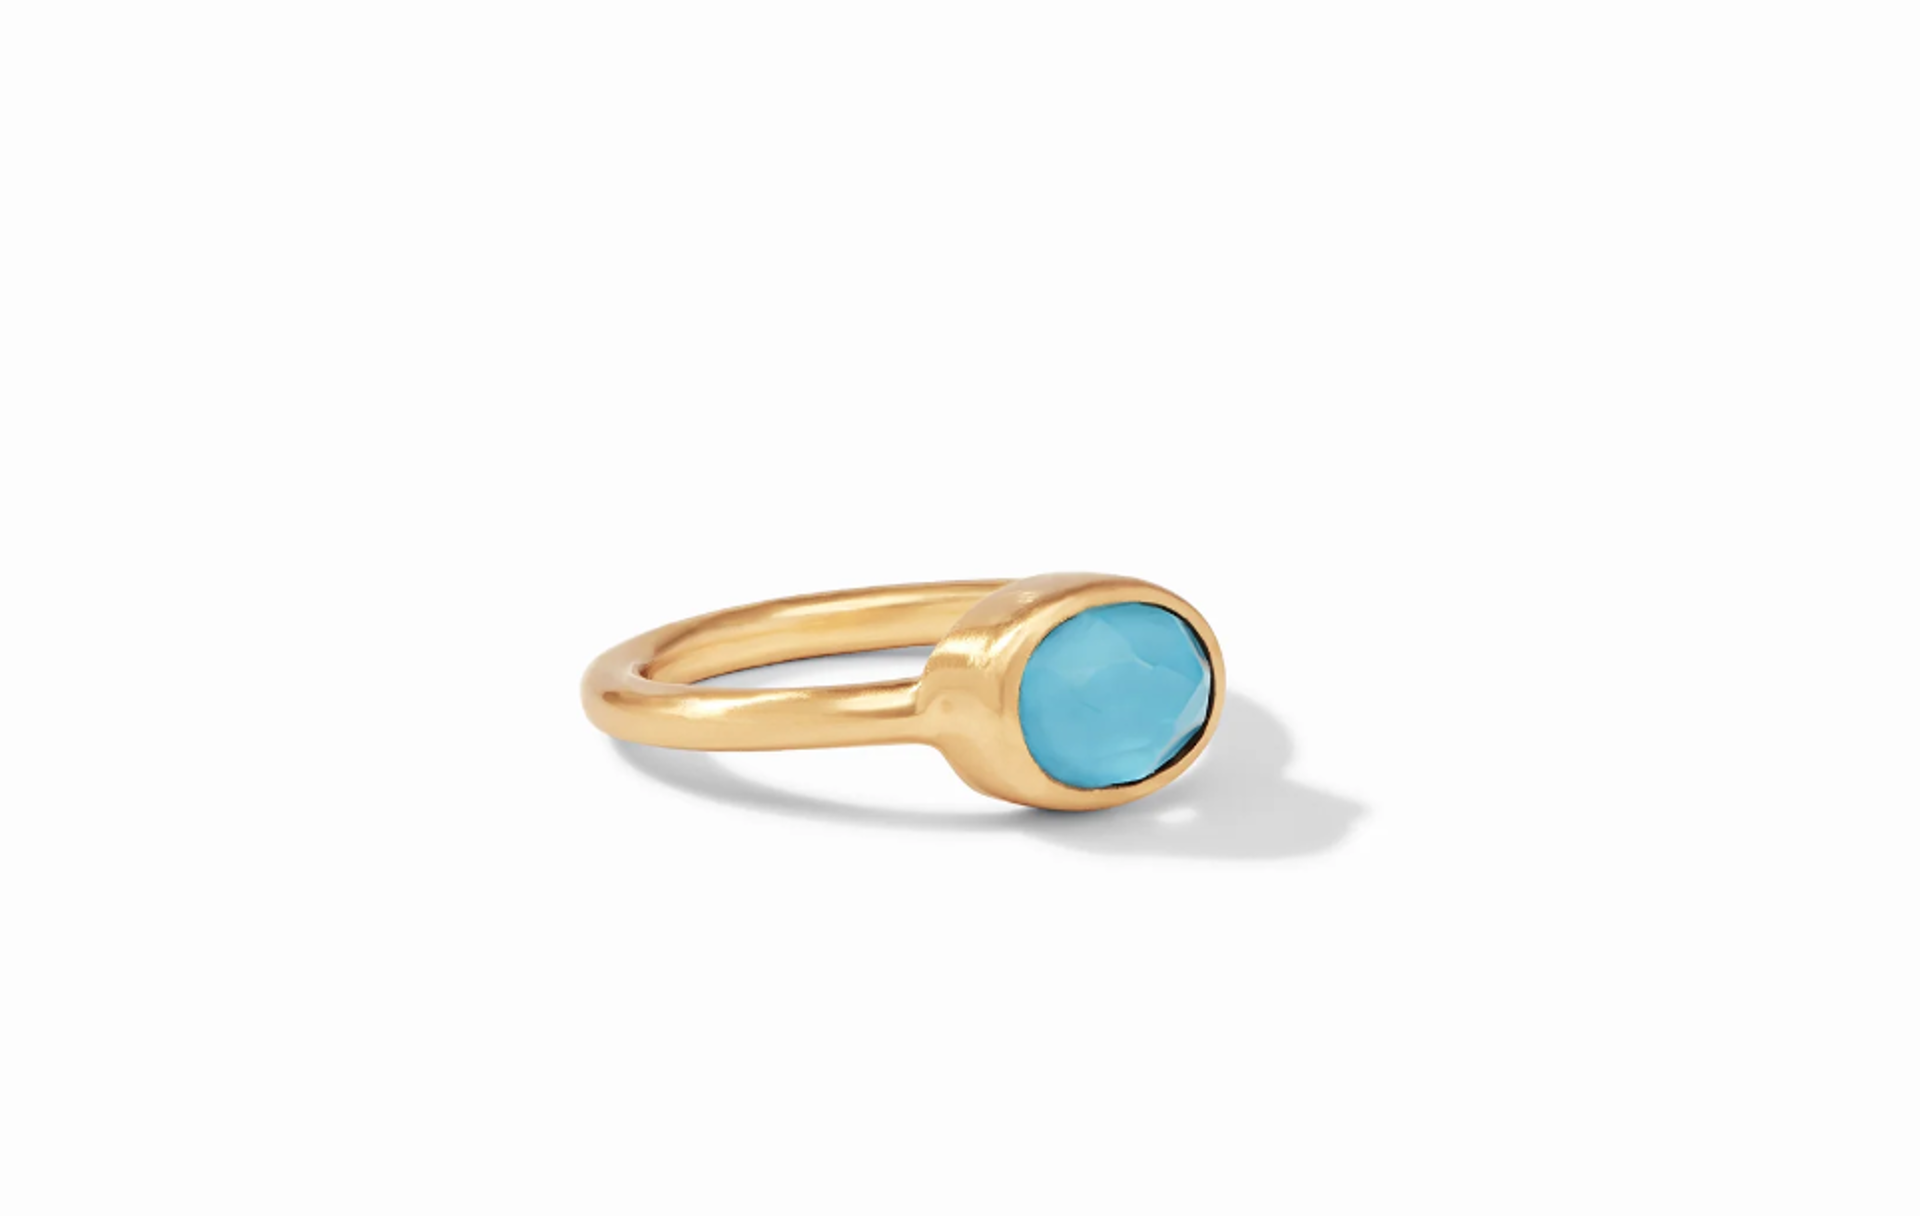 Jewel Stack Ring - Iridescent Pacific Blue - 7 by Julie Vos